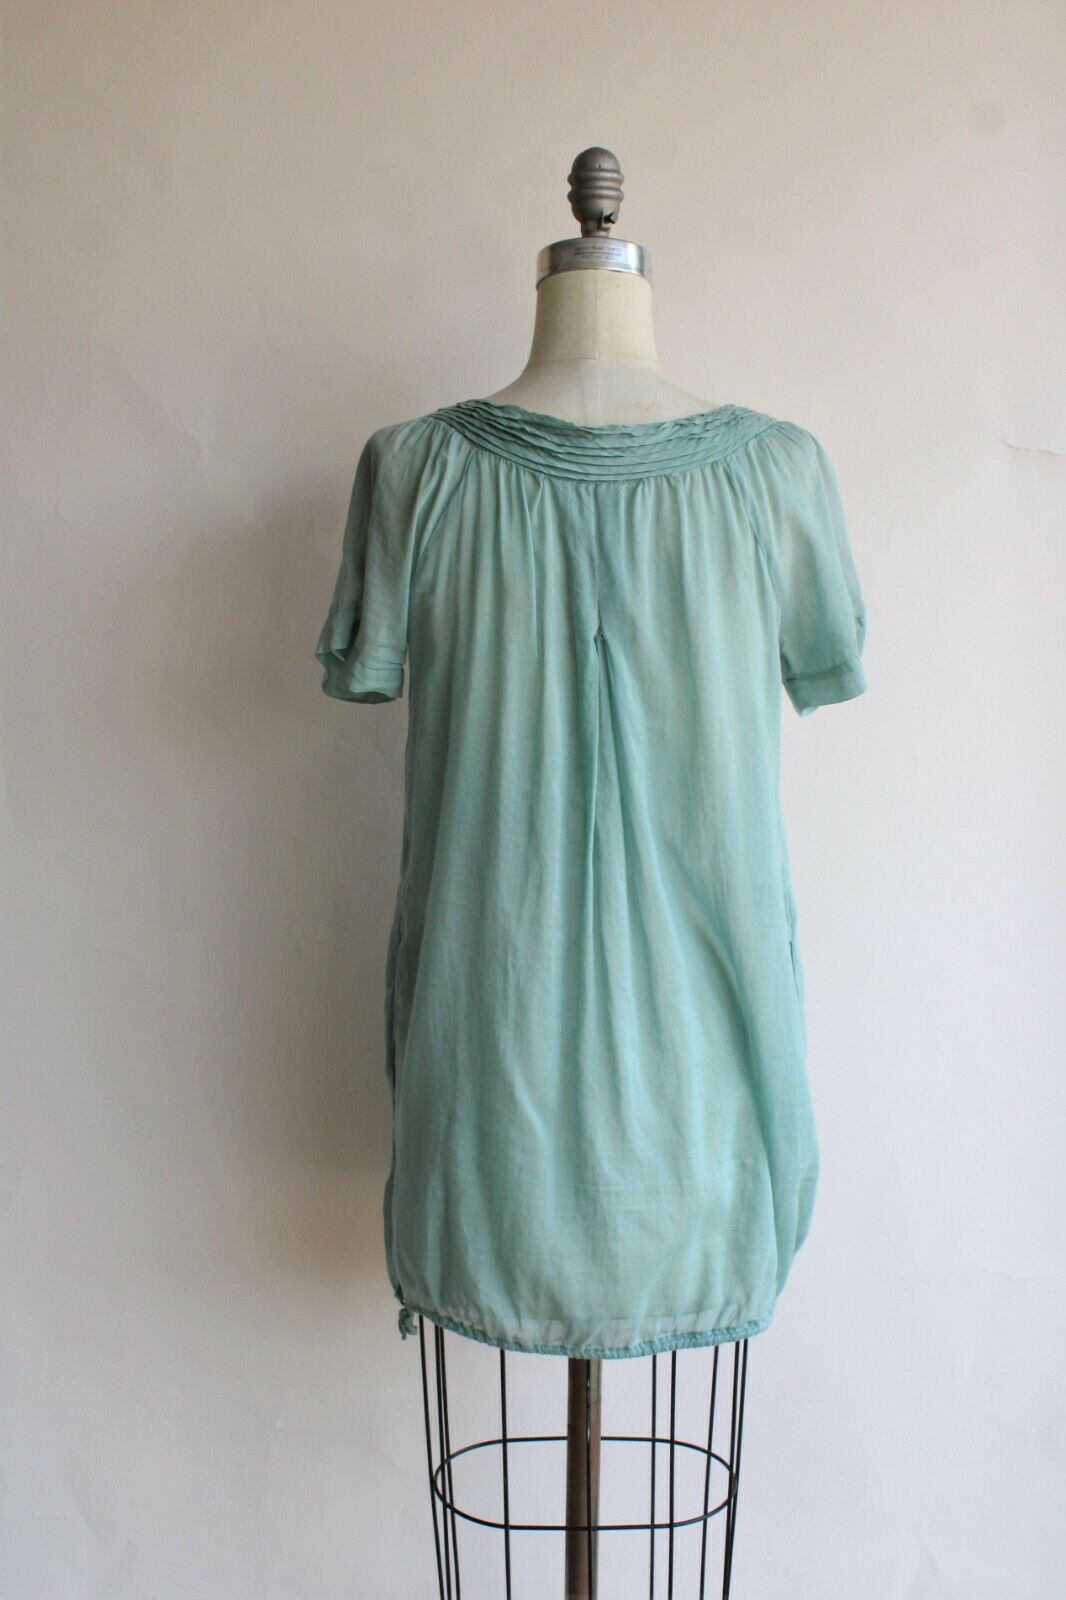 Trinity Anthropologie tunic blouse or dress with pockets, size Small